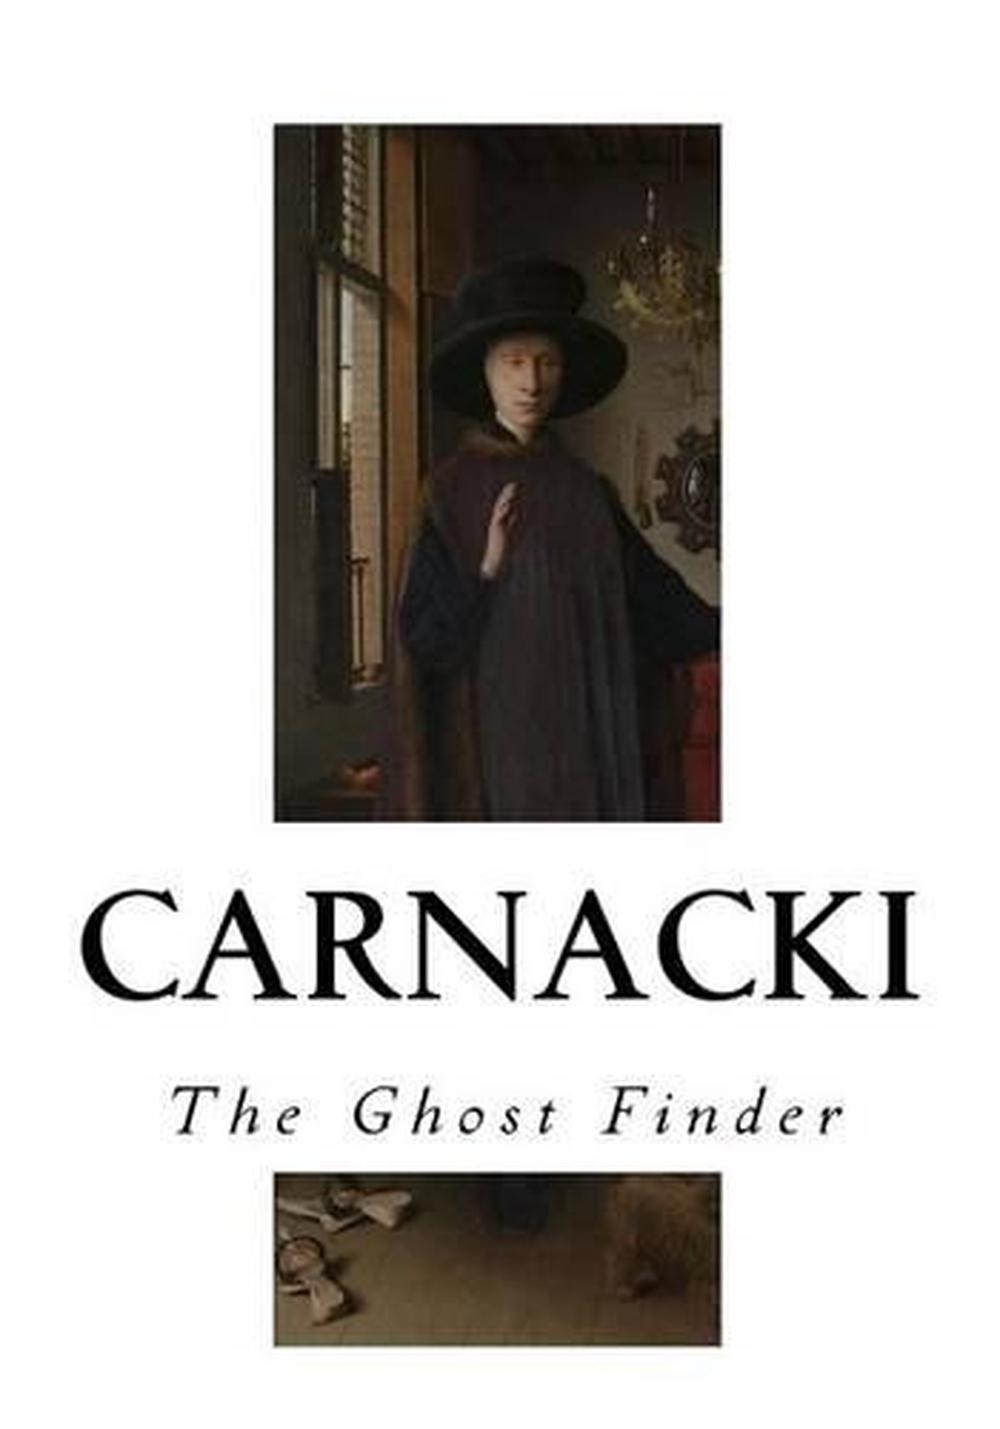 carnacki the ghost finder by william hope hodgson